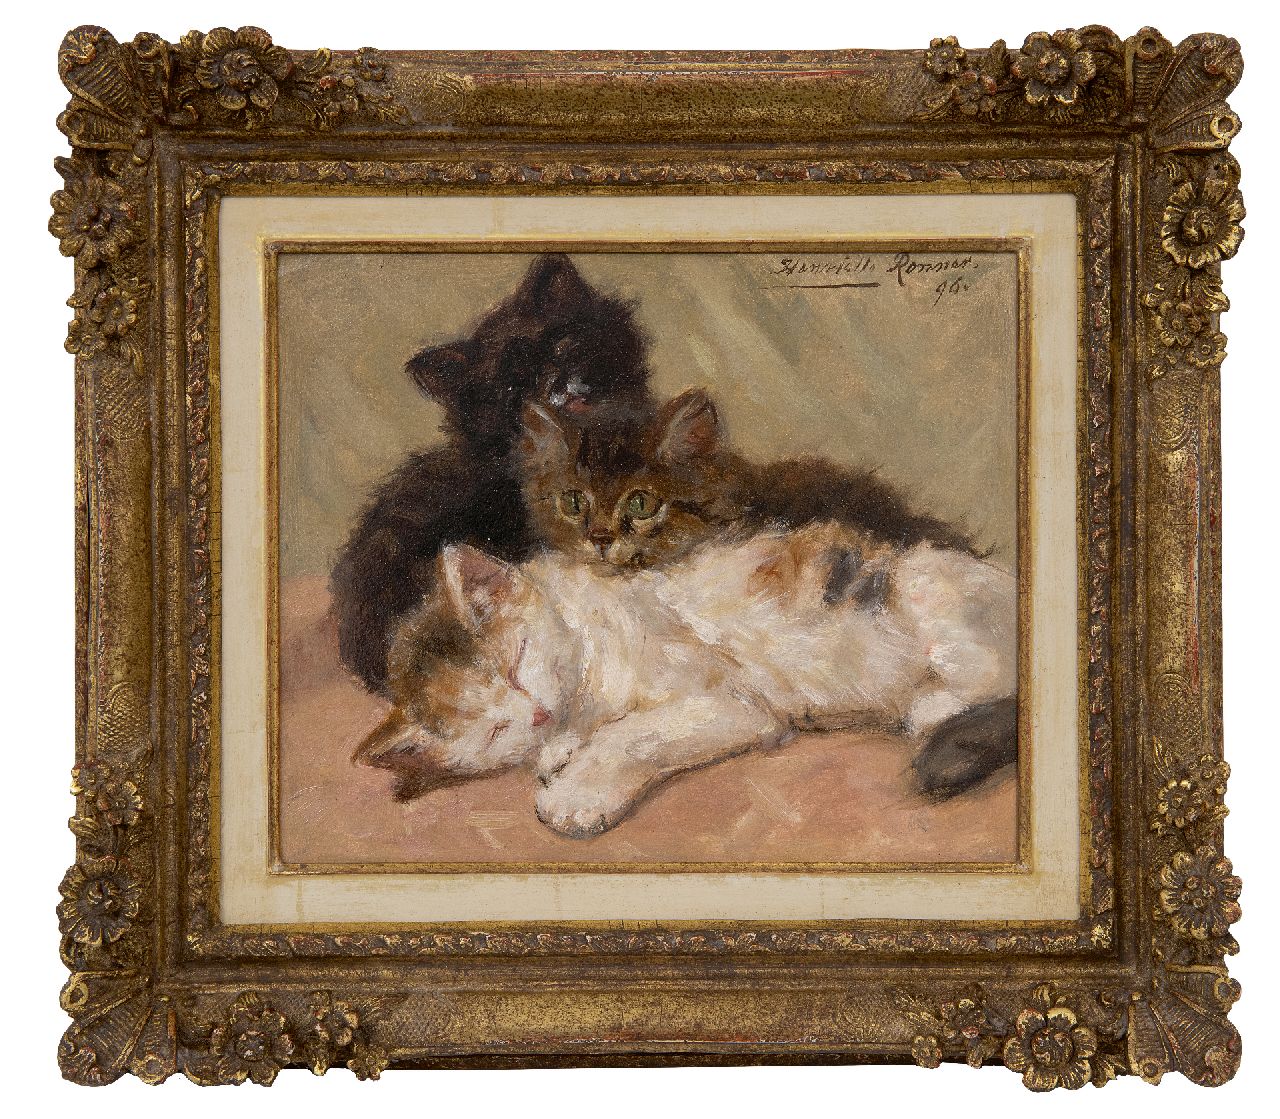 Ronner-Knip H.  | Henriette Ronner-Knip, Three kittens, oil on paper laid down on panel 19.0 x 22.5 cm, signed u.r. and dated '96